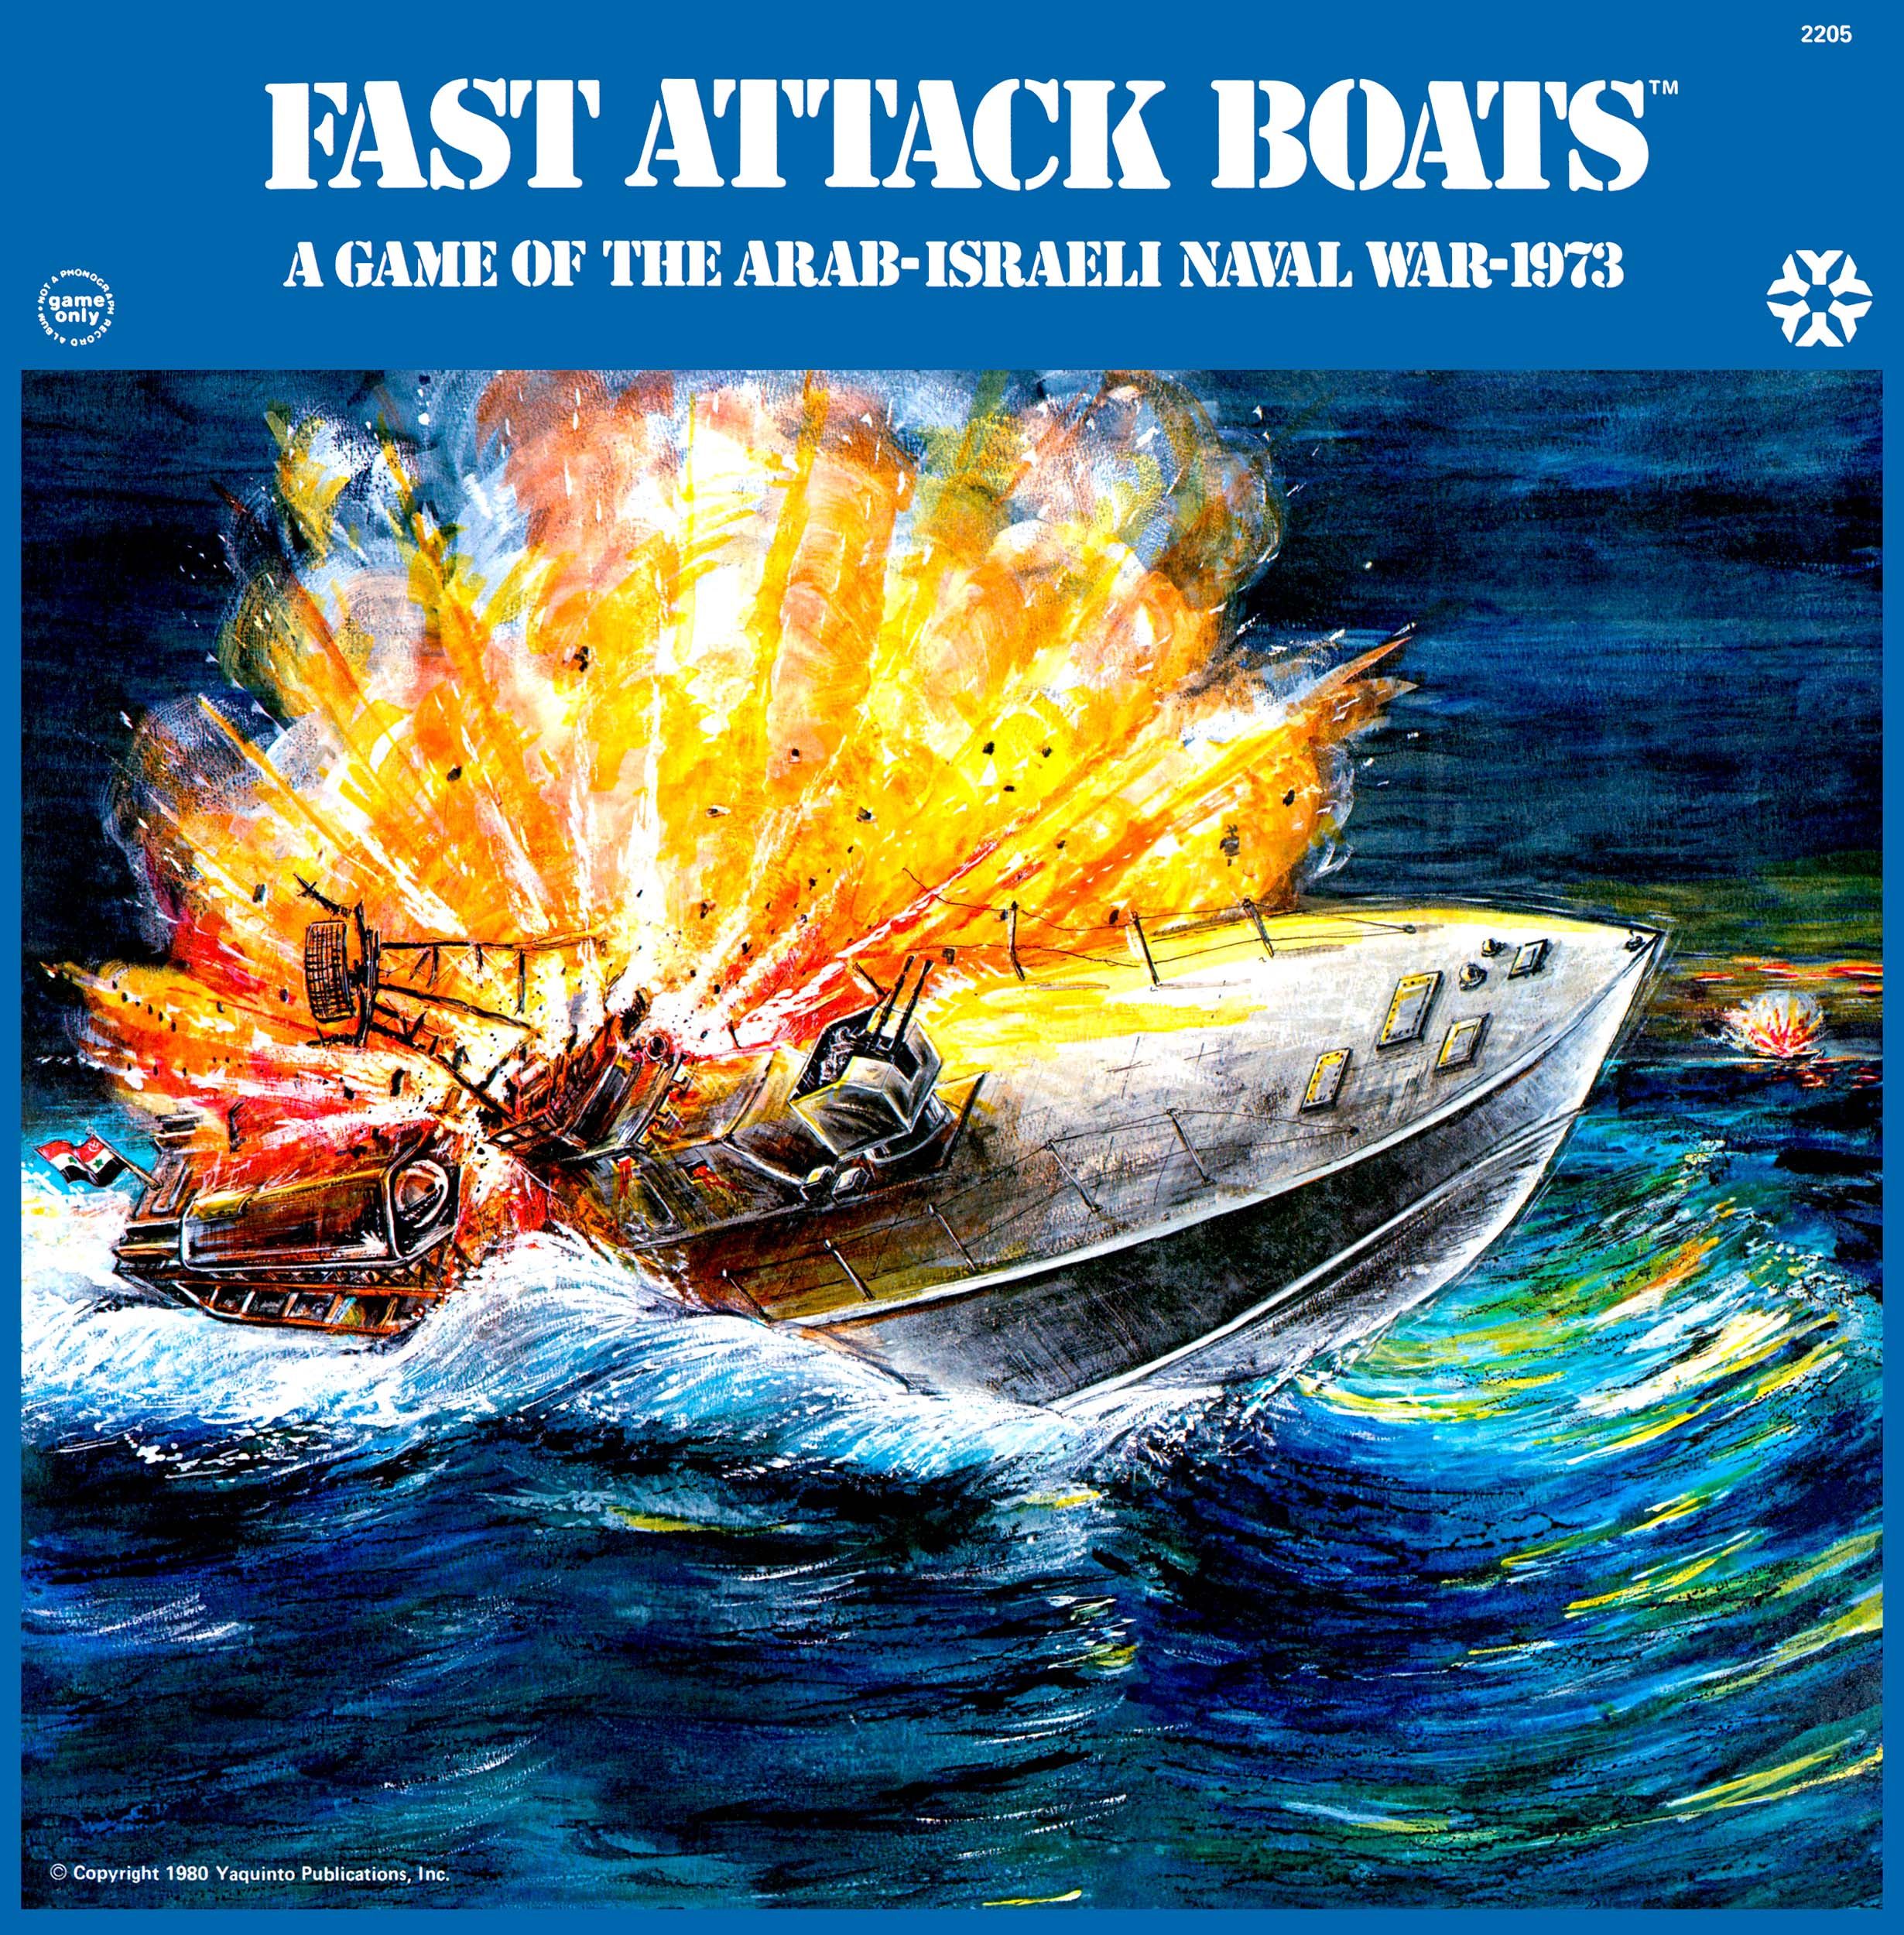 Fast Attack Boats: A Game of the Arab-Israeli Naval War 1973